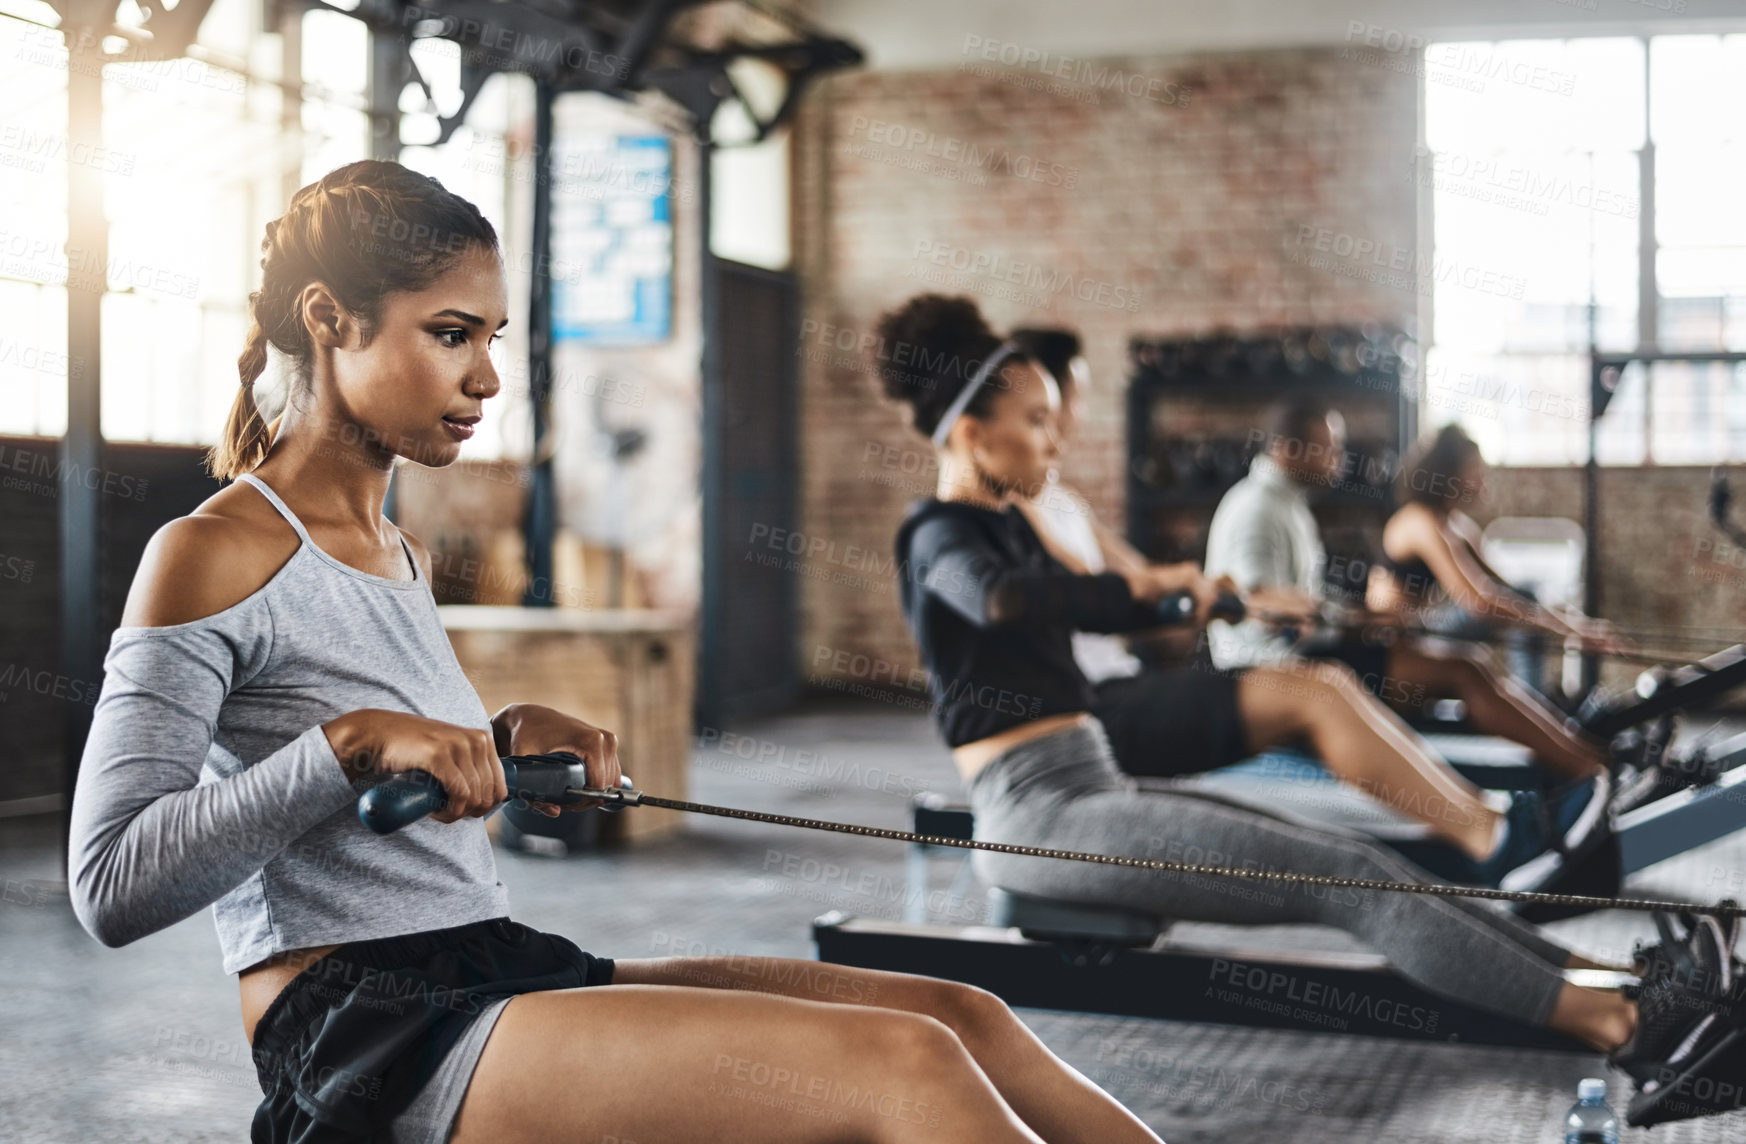 Buy stock photo Shot of a young woman working out with a rowing machine in the gym